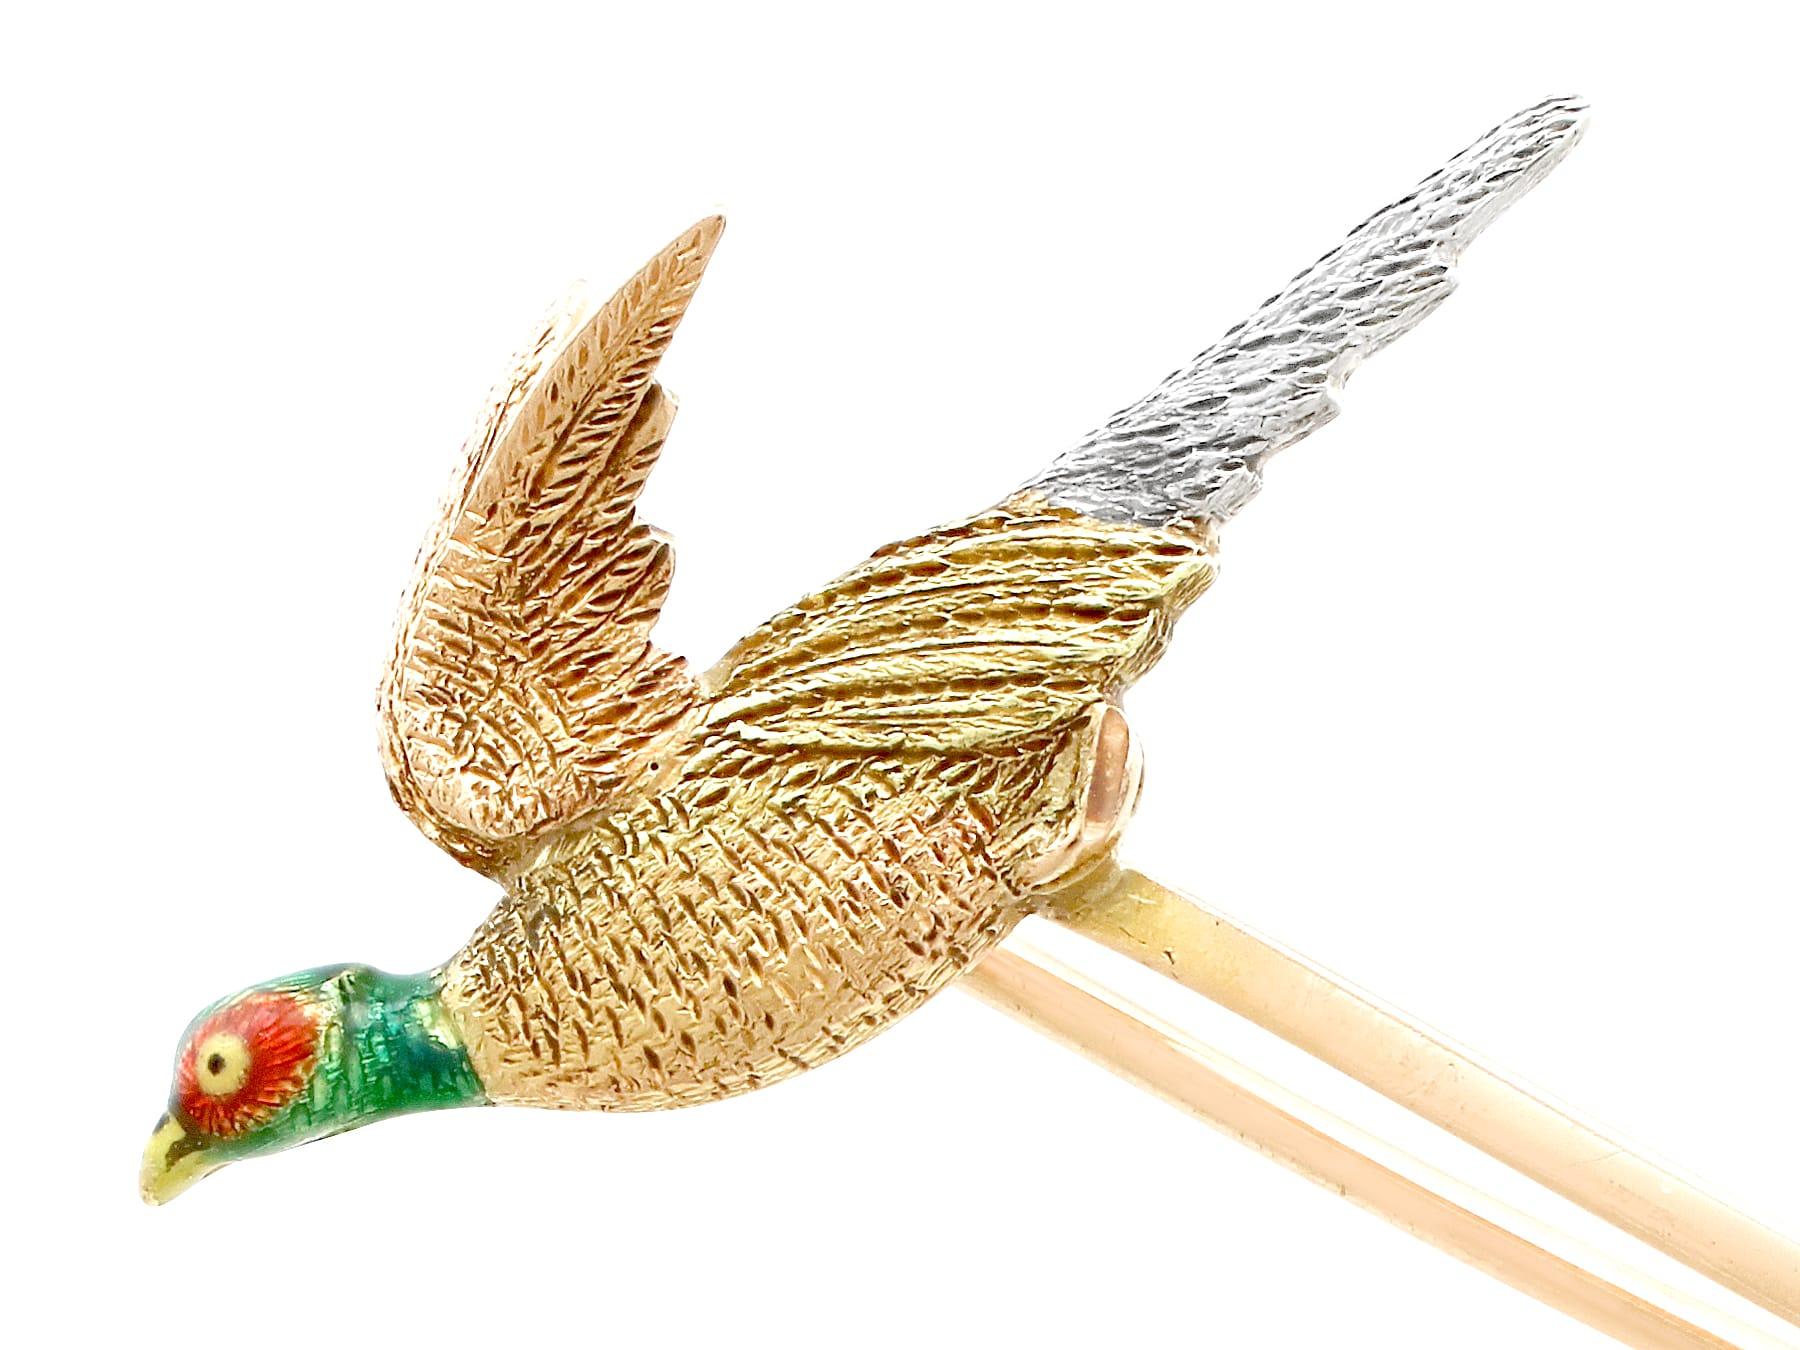 An exceptional, fine and impressive enameled pheasant bar brooch in platinum and 15 karat yellow gold; part of our antique jewelry and estate jewelry collections.

This exceptional, fine and impressive antique bar brooch has been crafted in 15k